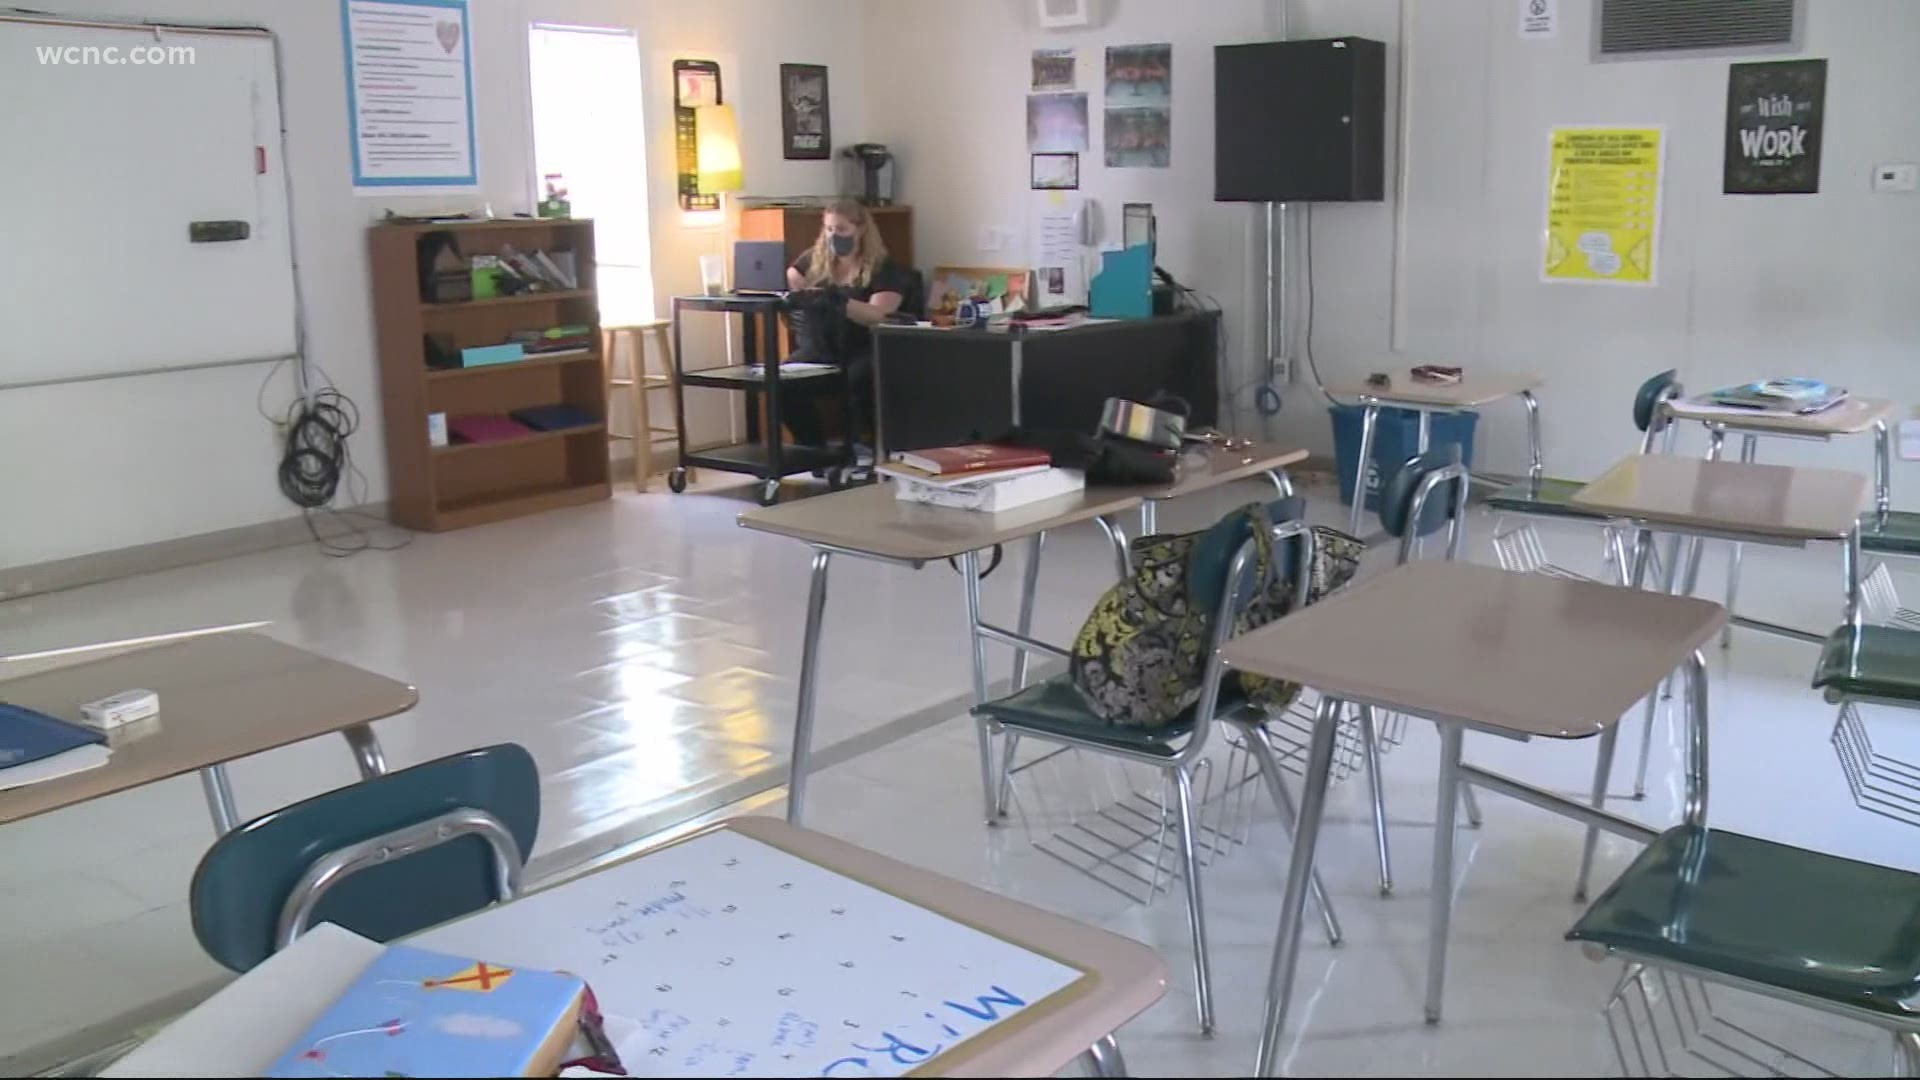 While some parents are pushing for a full time return for students, others are worried about teacher vacancies and health concerns.